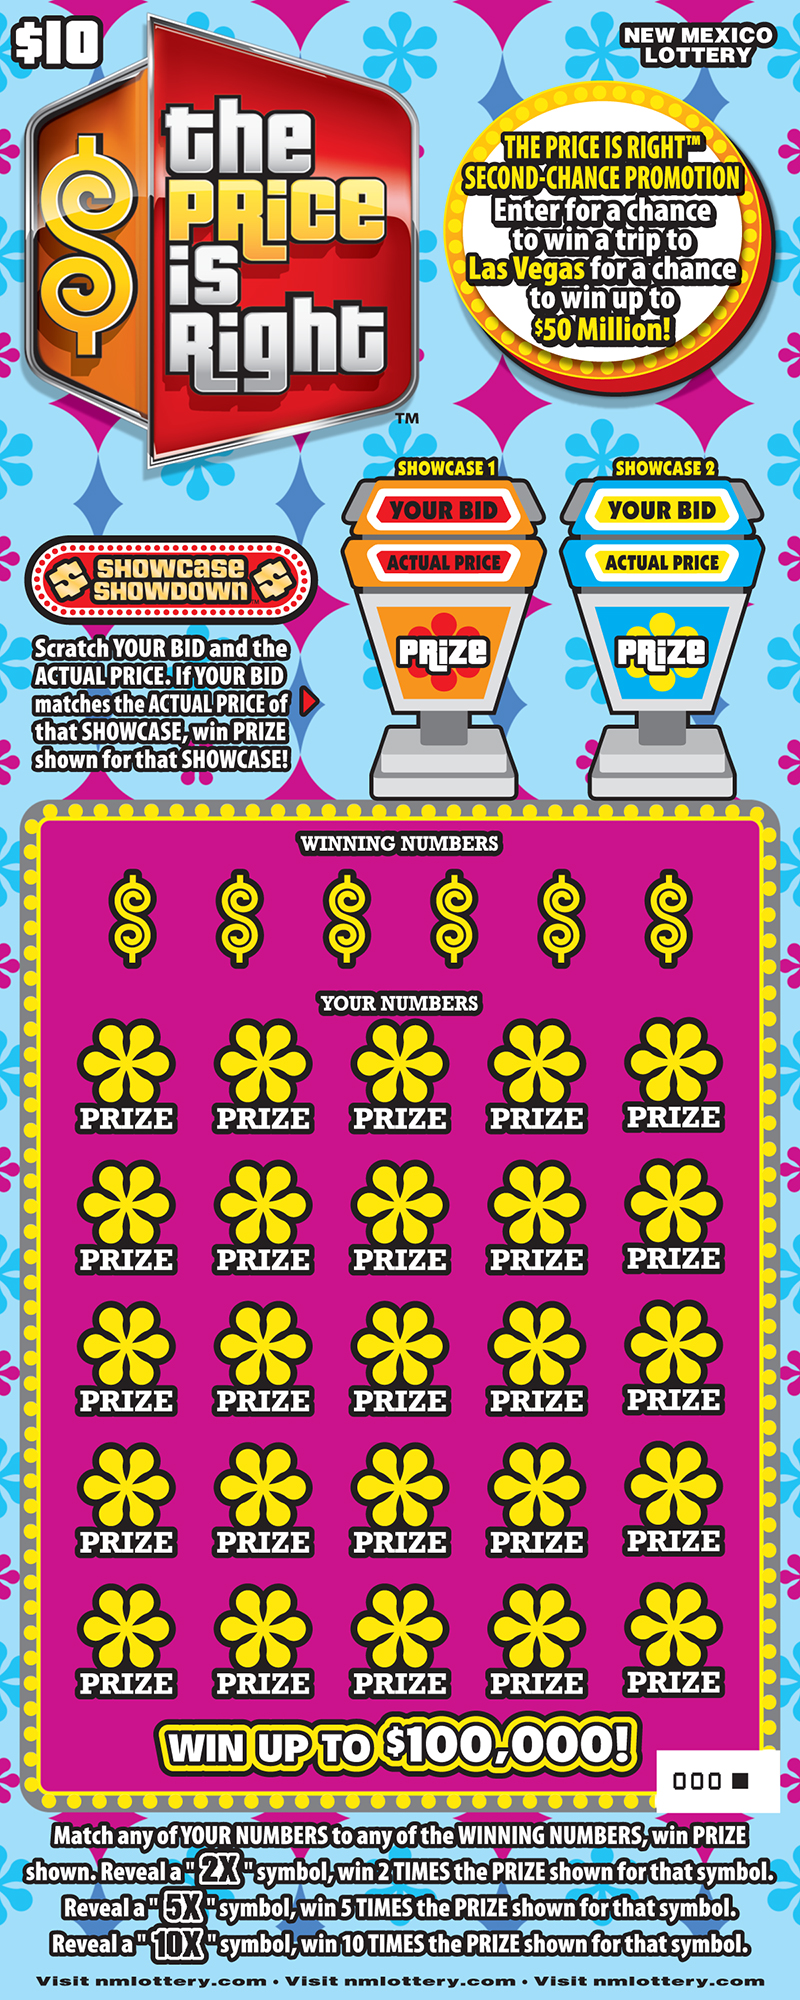 THE PRICE IS RIGHT Scratcher